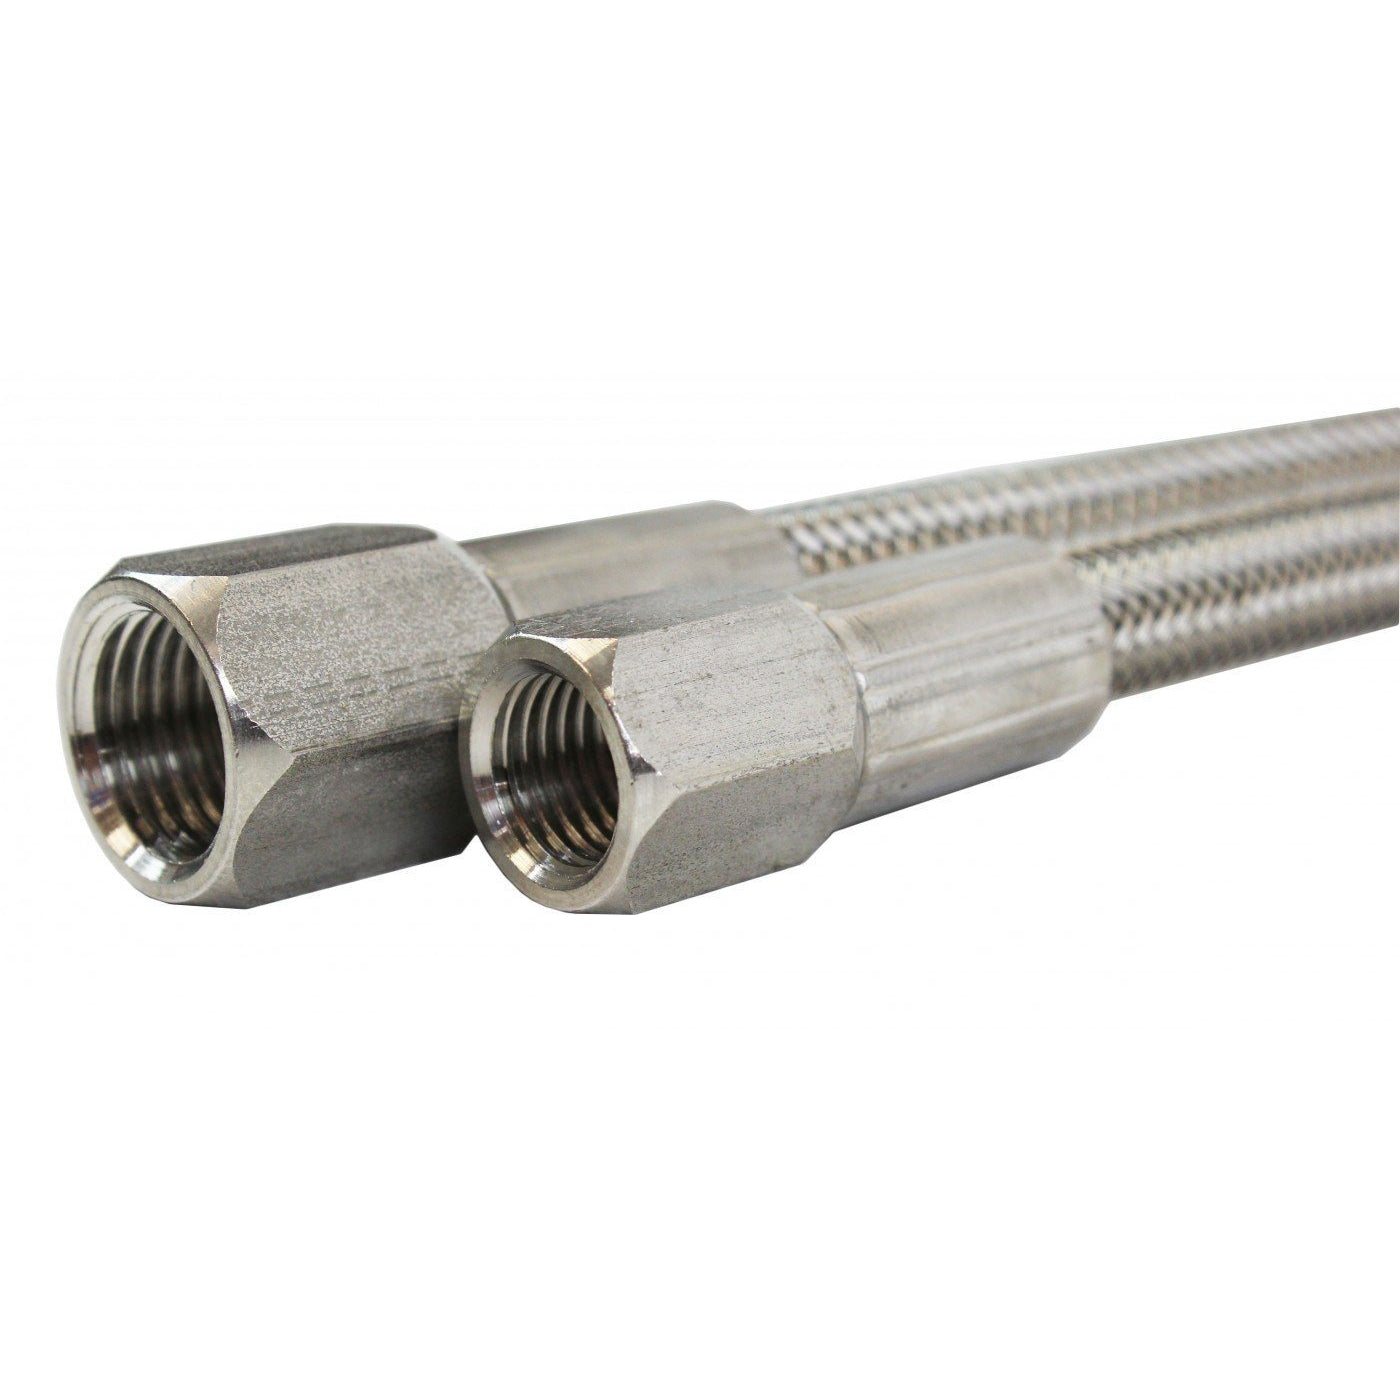 1/2" 37° JIC Stainless Steel Hose Shop All Categories BVV 24-inch